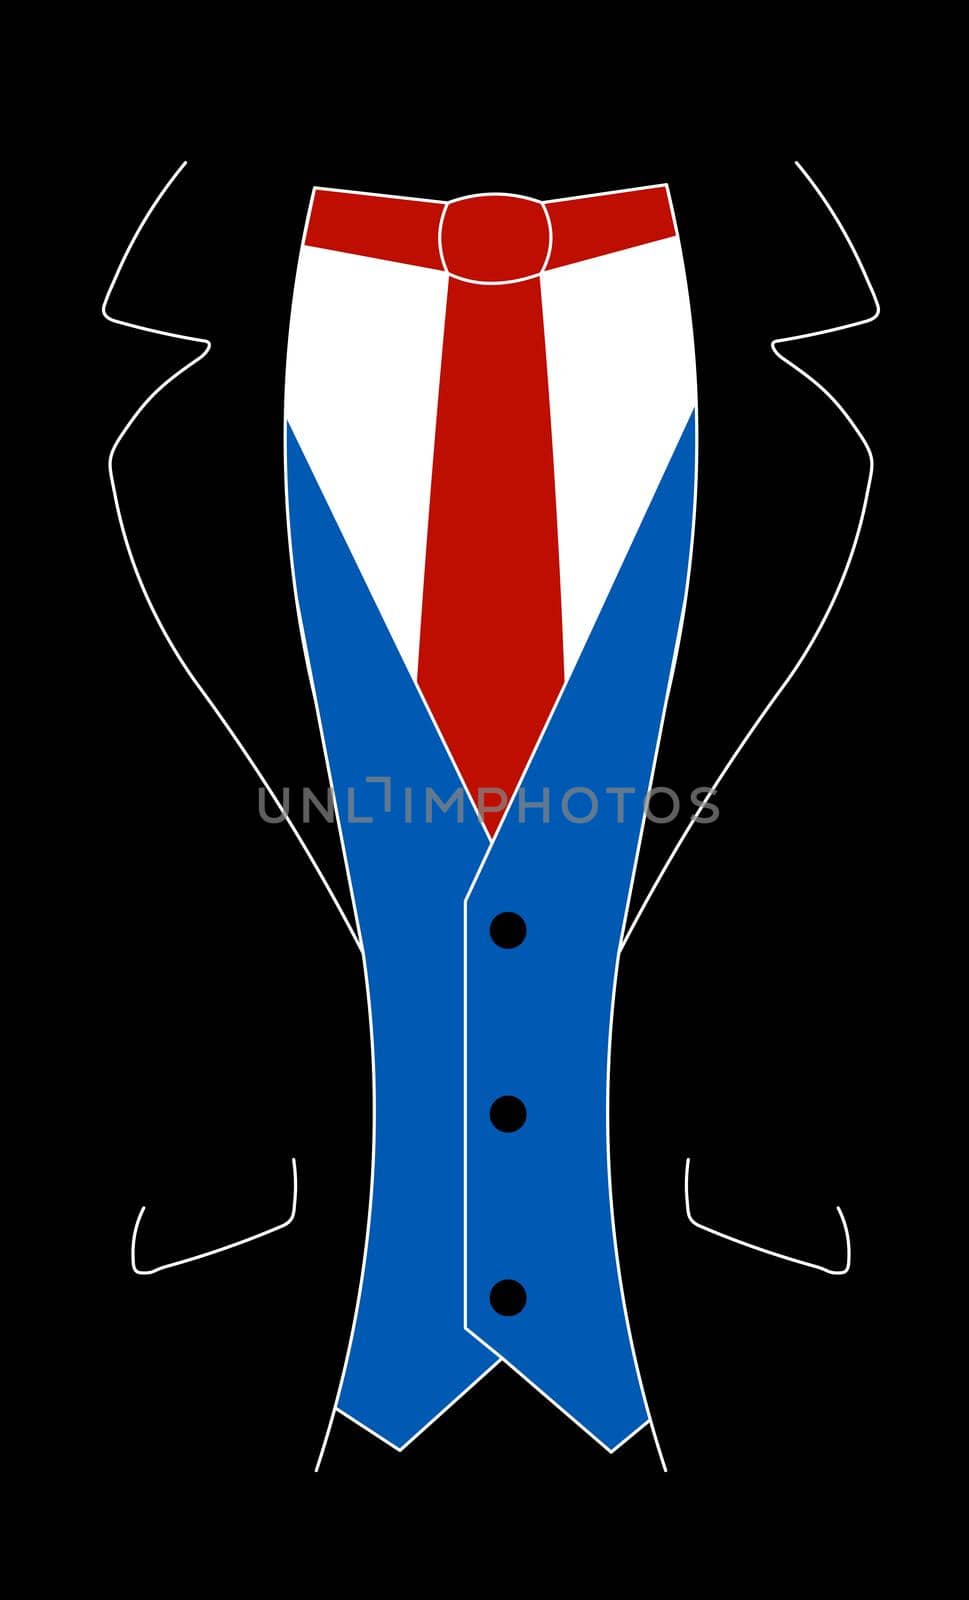 A suit with a red tie and blue iner jacket.